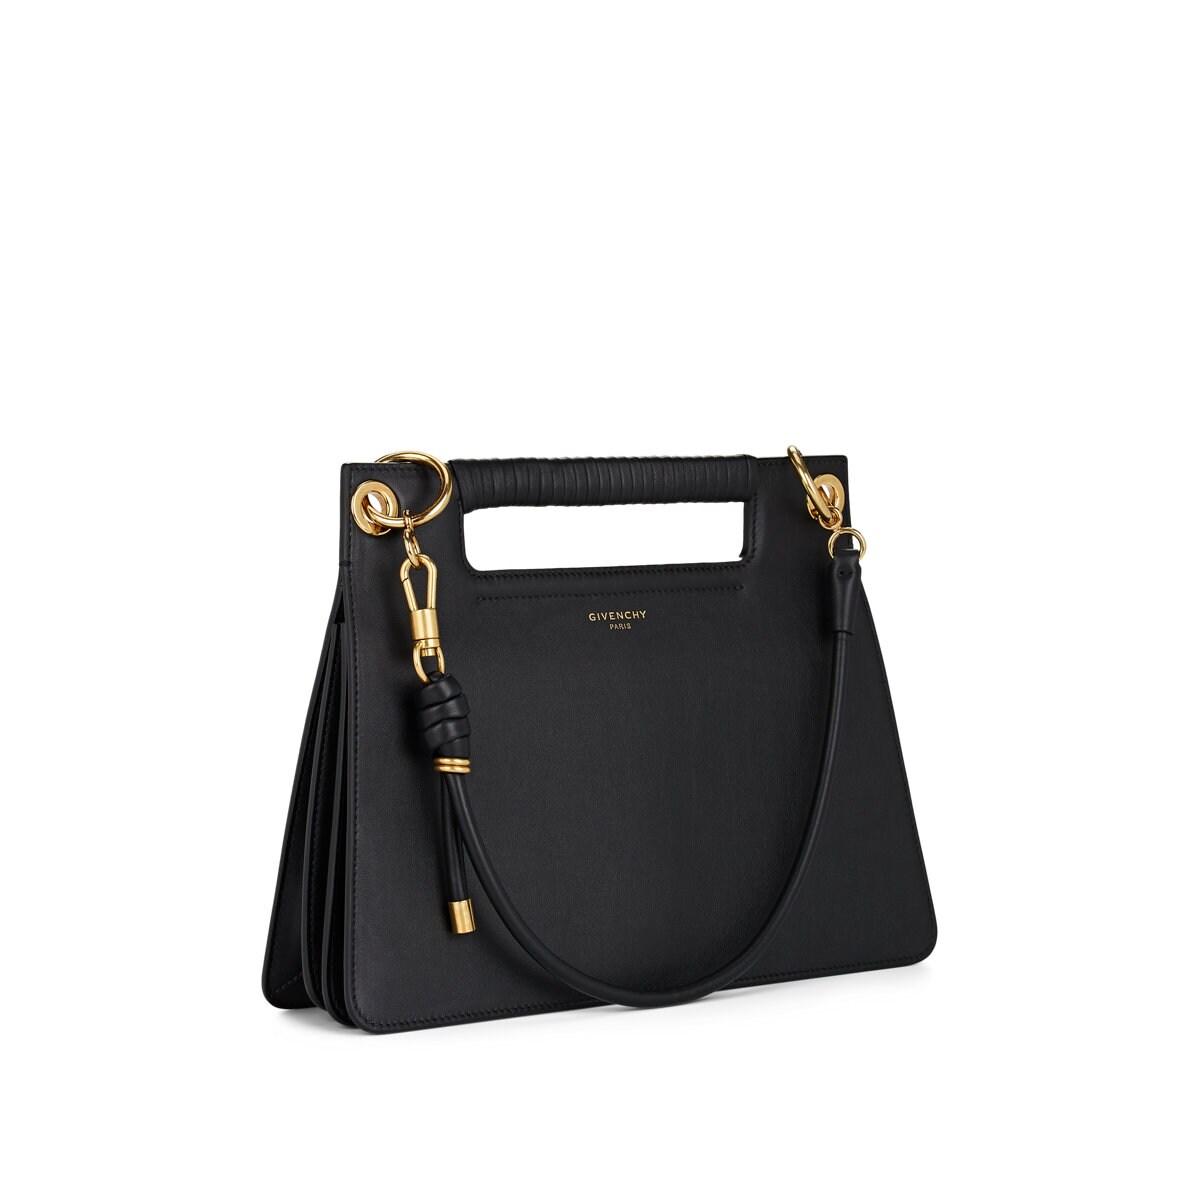 Givenchy Whip Small Leather Shoulder Bag in Black - Lyst